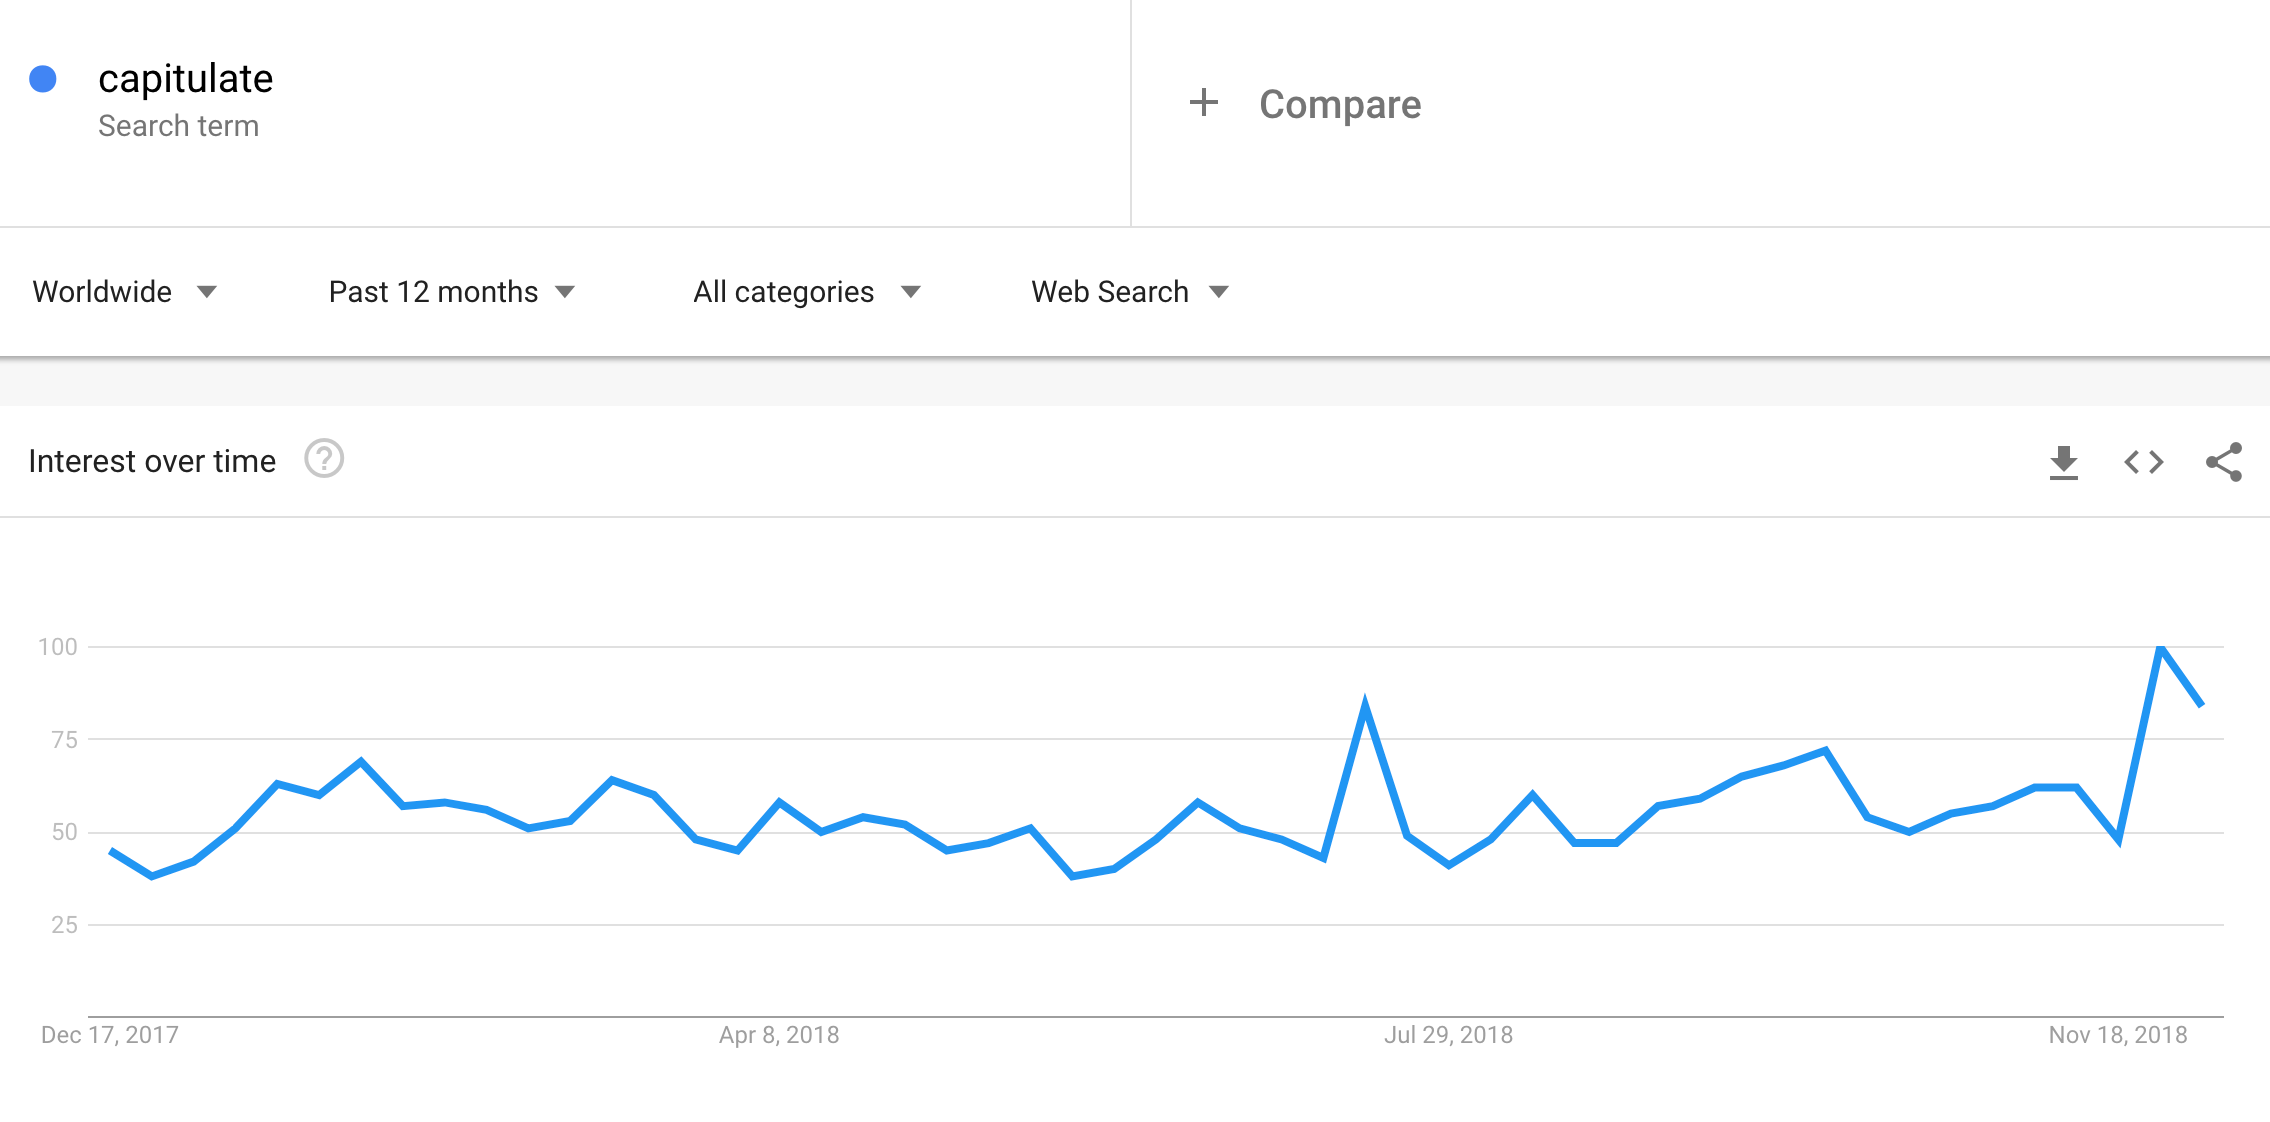 Searches for the word "capitulate" increased around the time of the release of Grimes's single "We Appreciate Power".